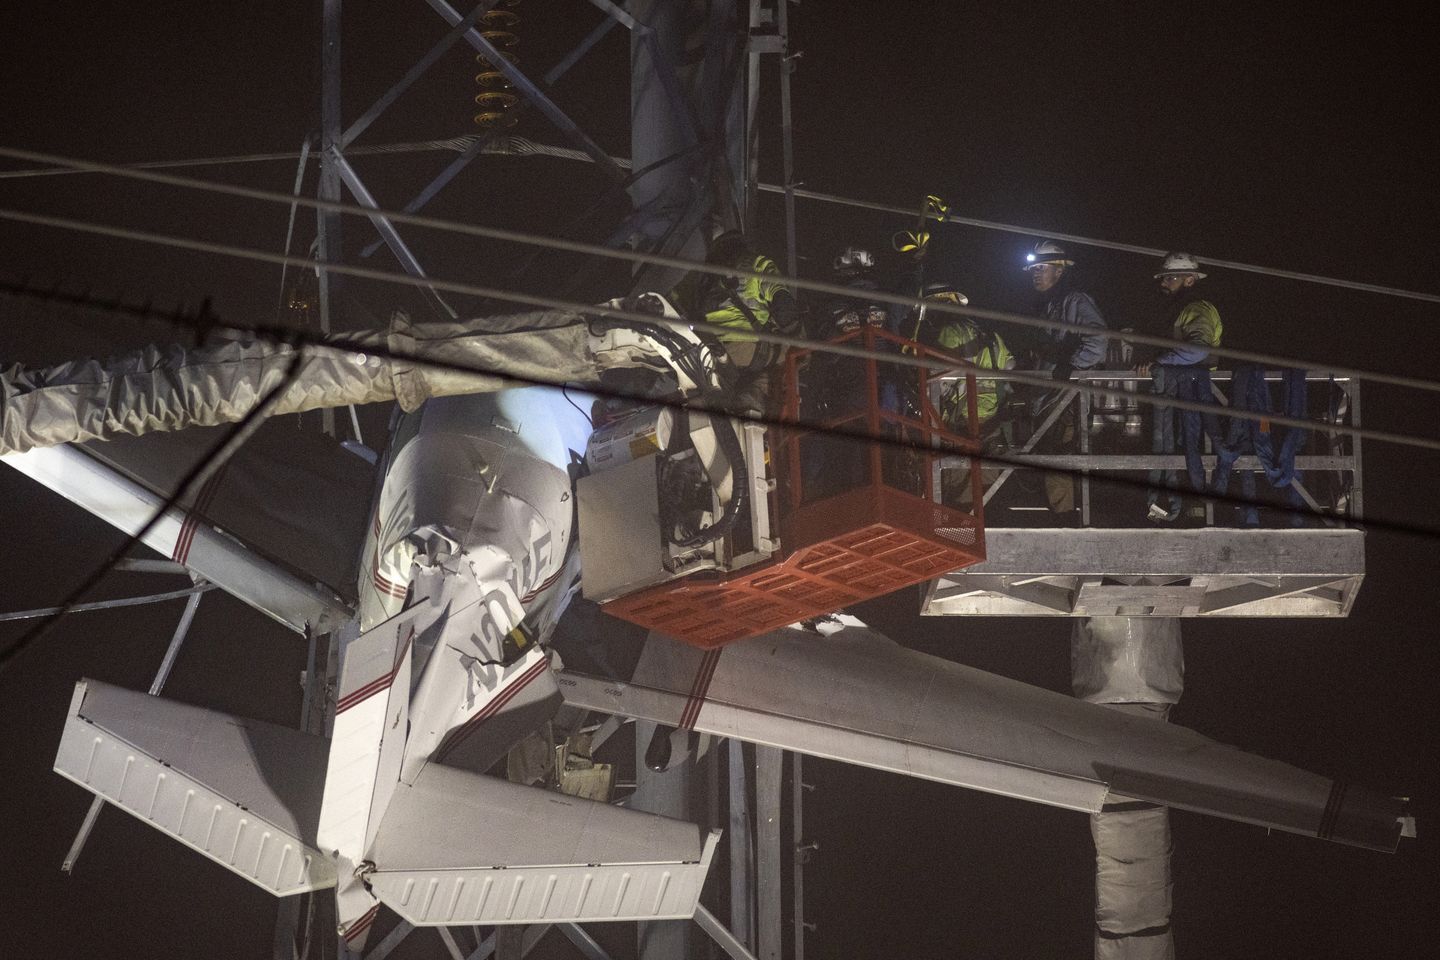 crews-rescue-2-from-plane-caught-in-power-lines-in-maryland-the-great